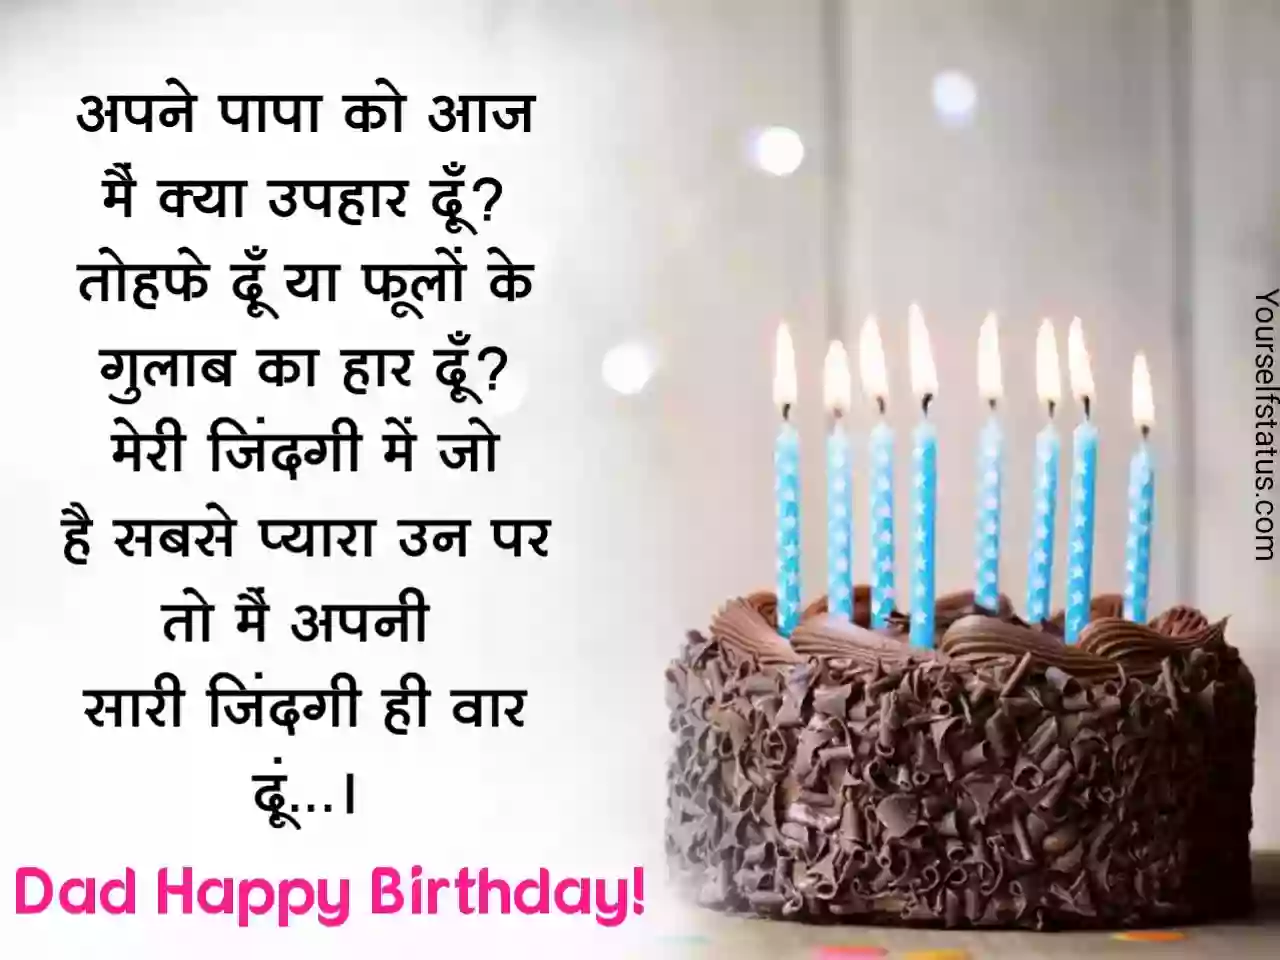 Happy birthday images for father in hindi